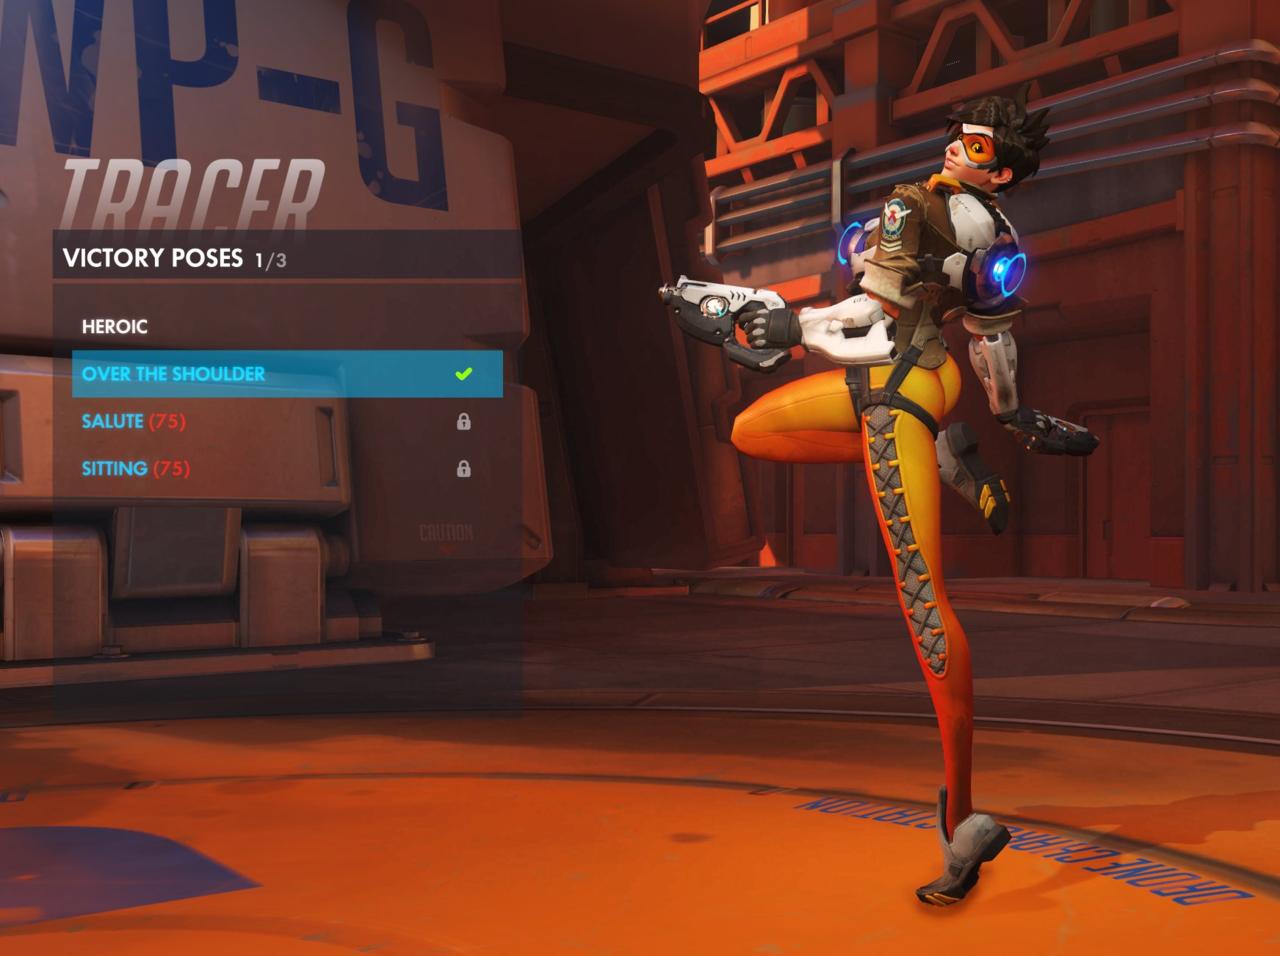 New Tracer Victory Pose for “Overwatch” Revealed - Improving On the Previous One